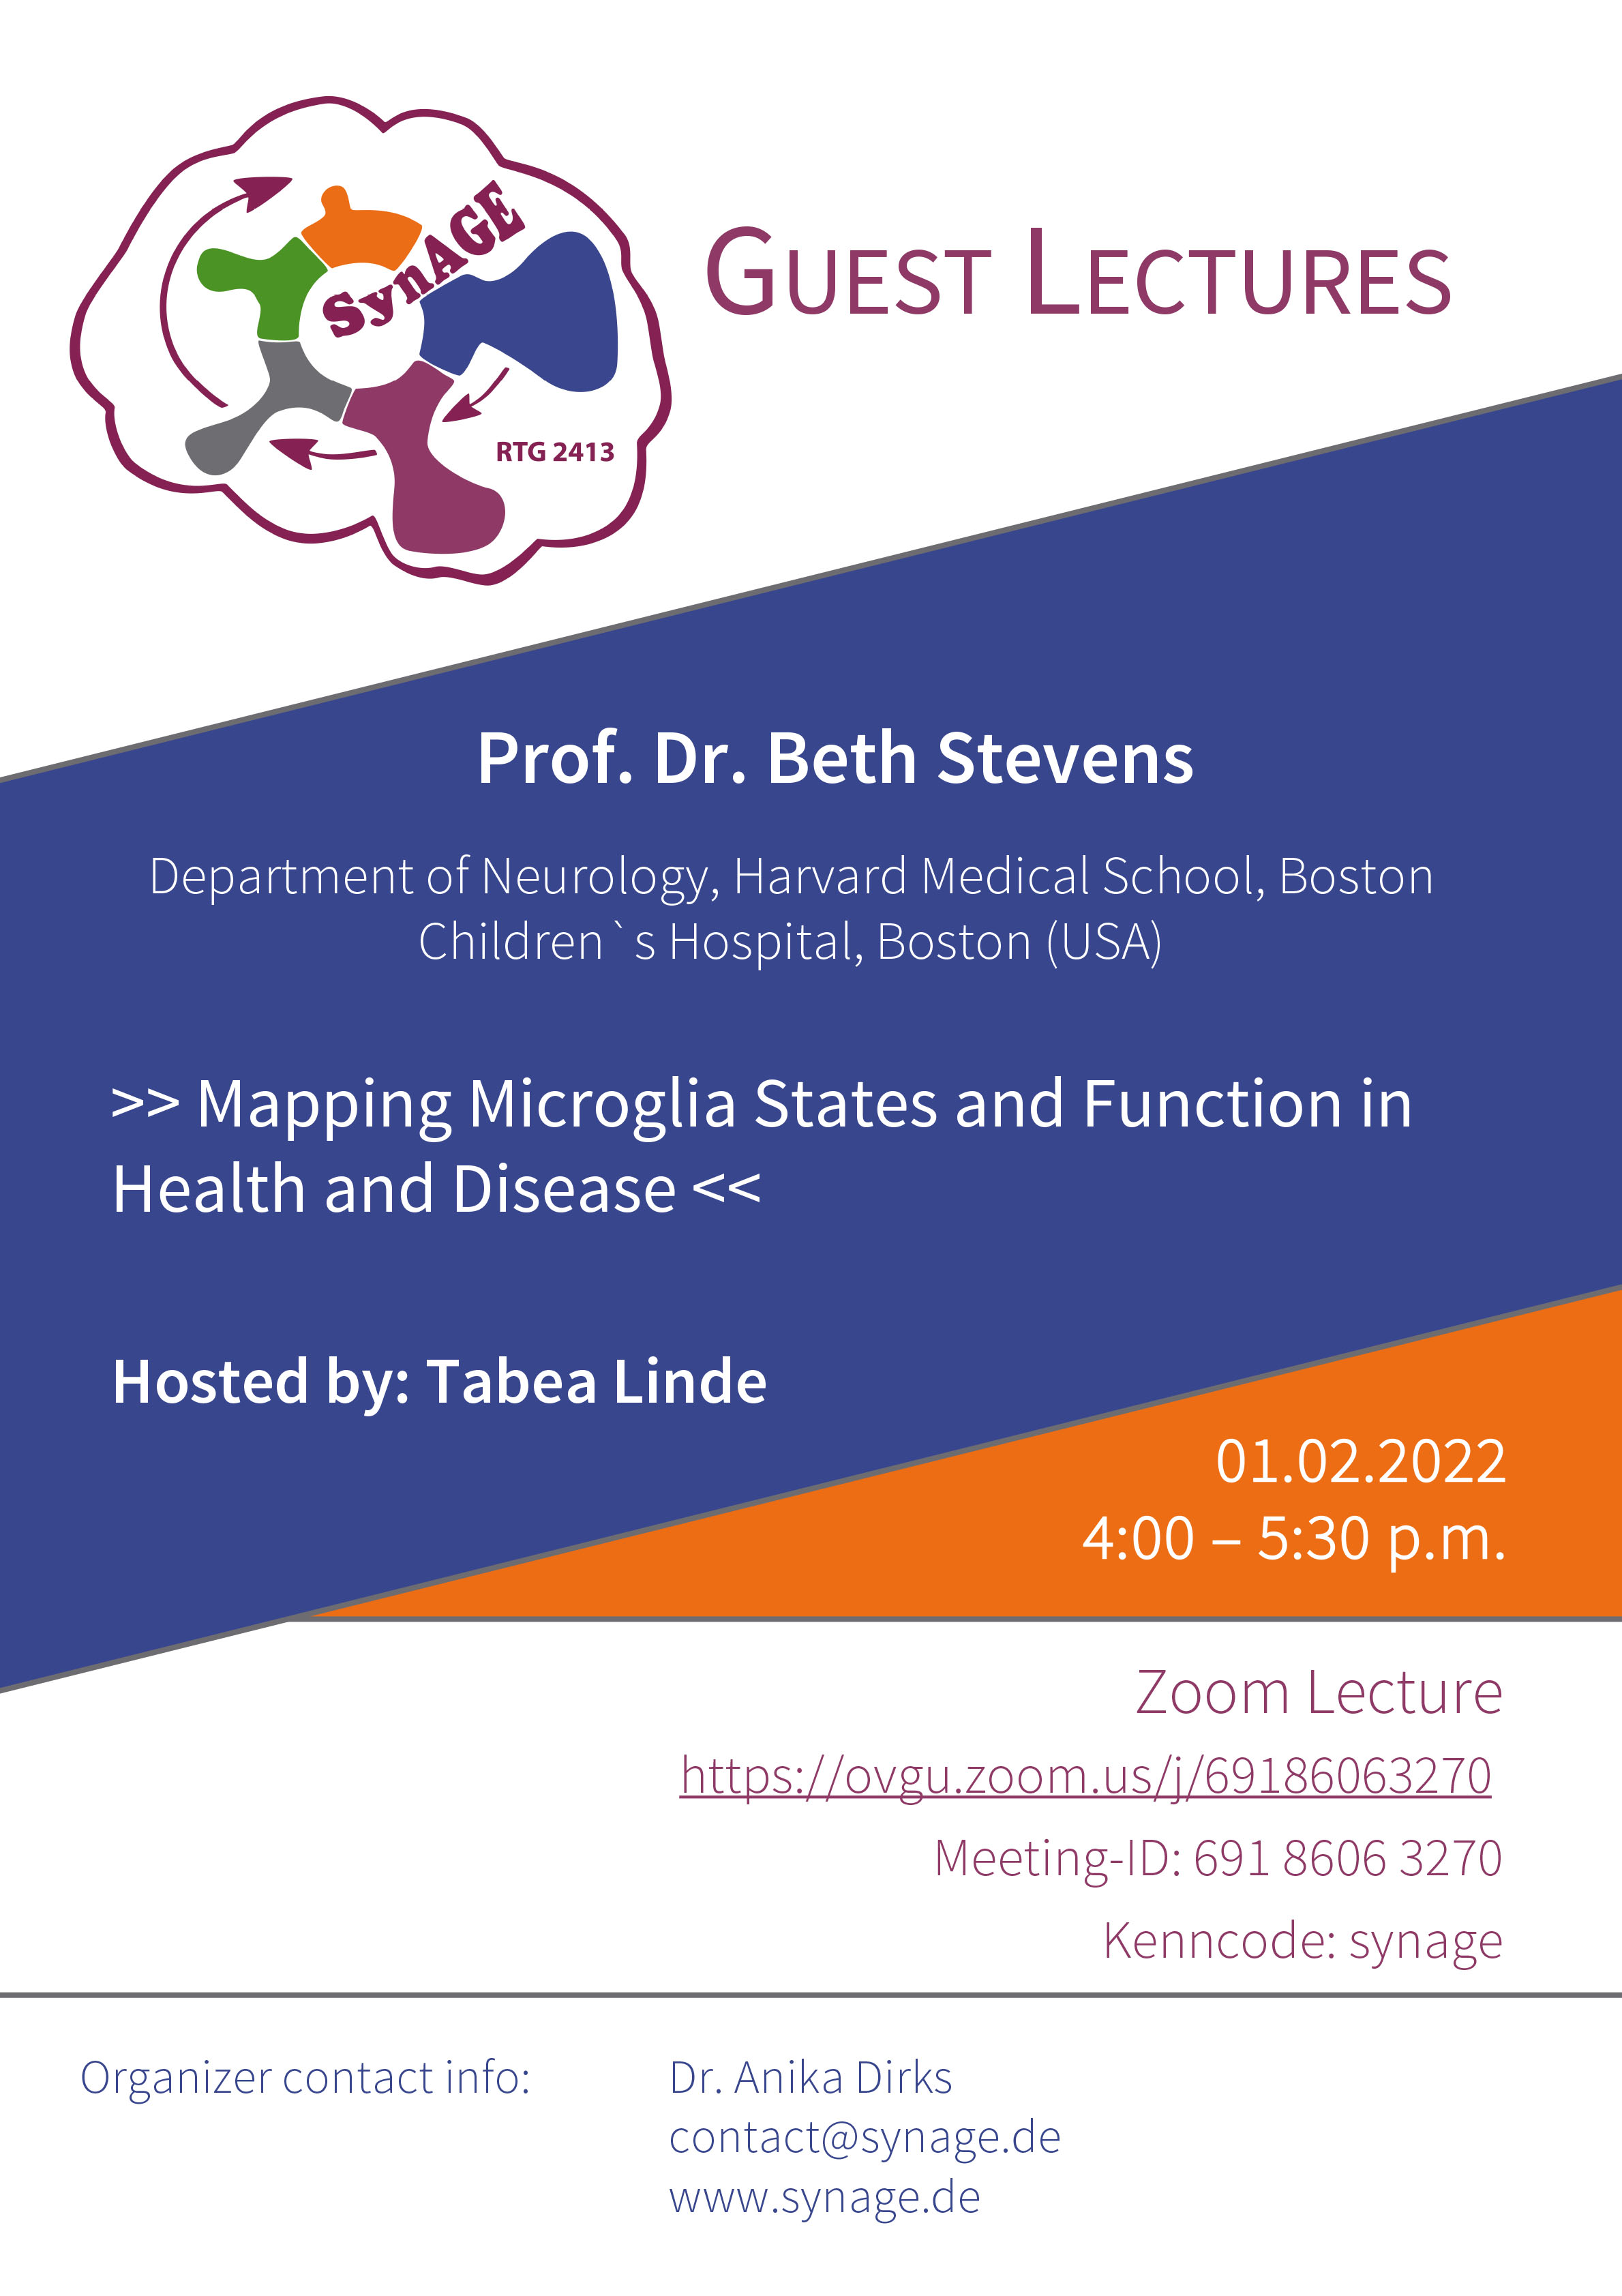 RTG 2413 Guest Lecture: Mapping Microglia States and Function in Health and Disease @ online